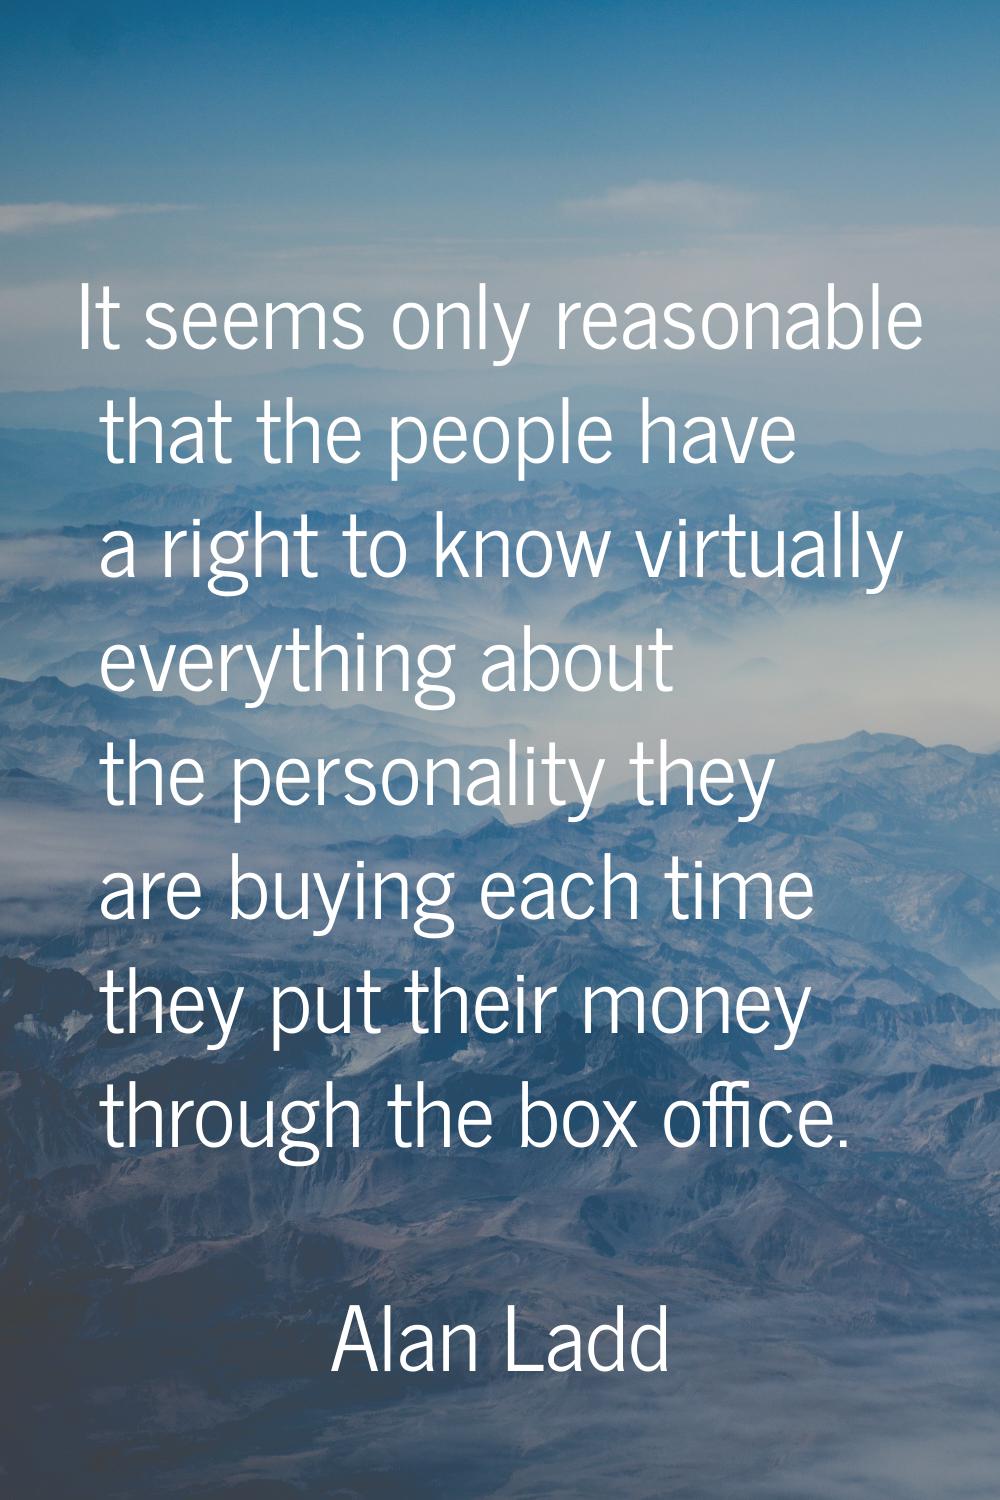 It seems only reasonable that the people have a right to know virtually everything about the person